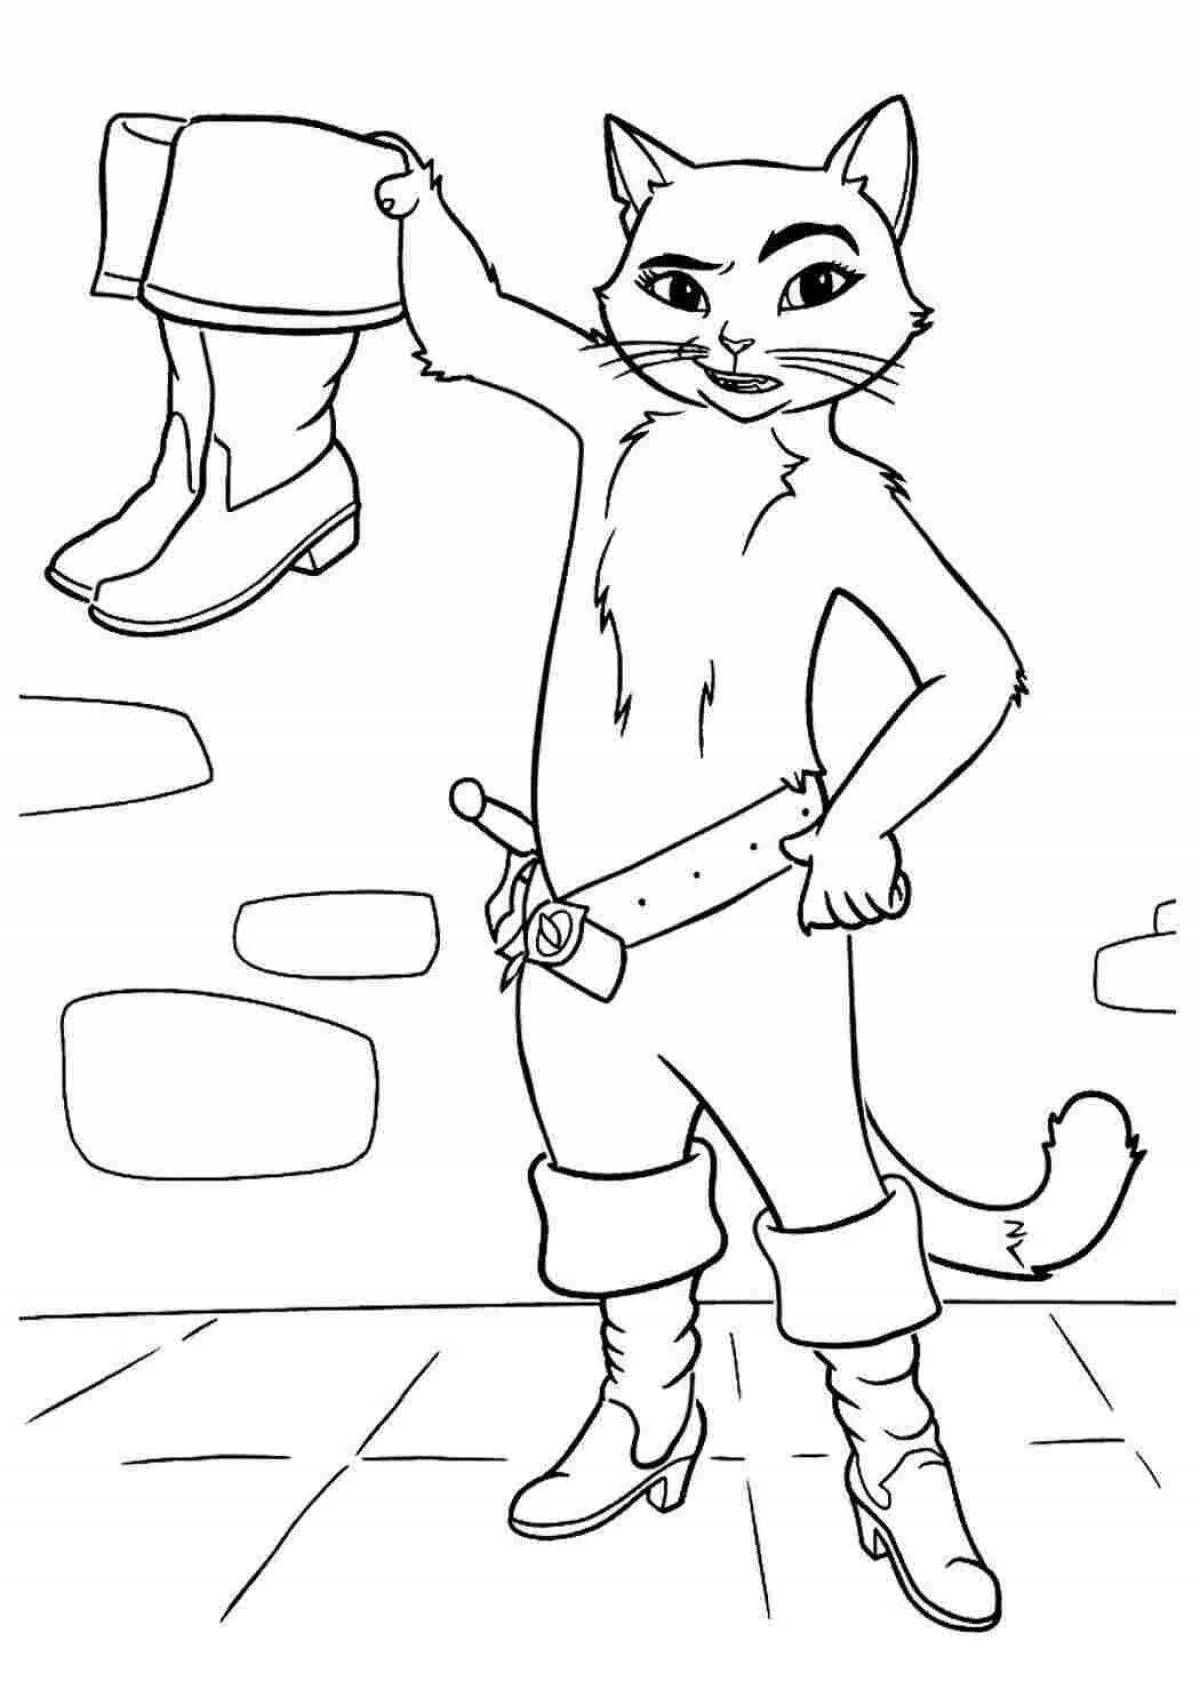 Coloring page magic puss in boots